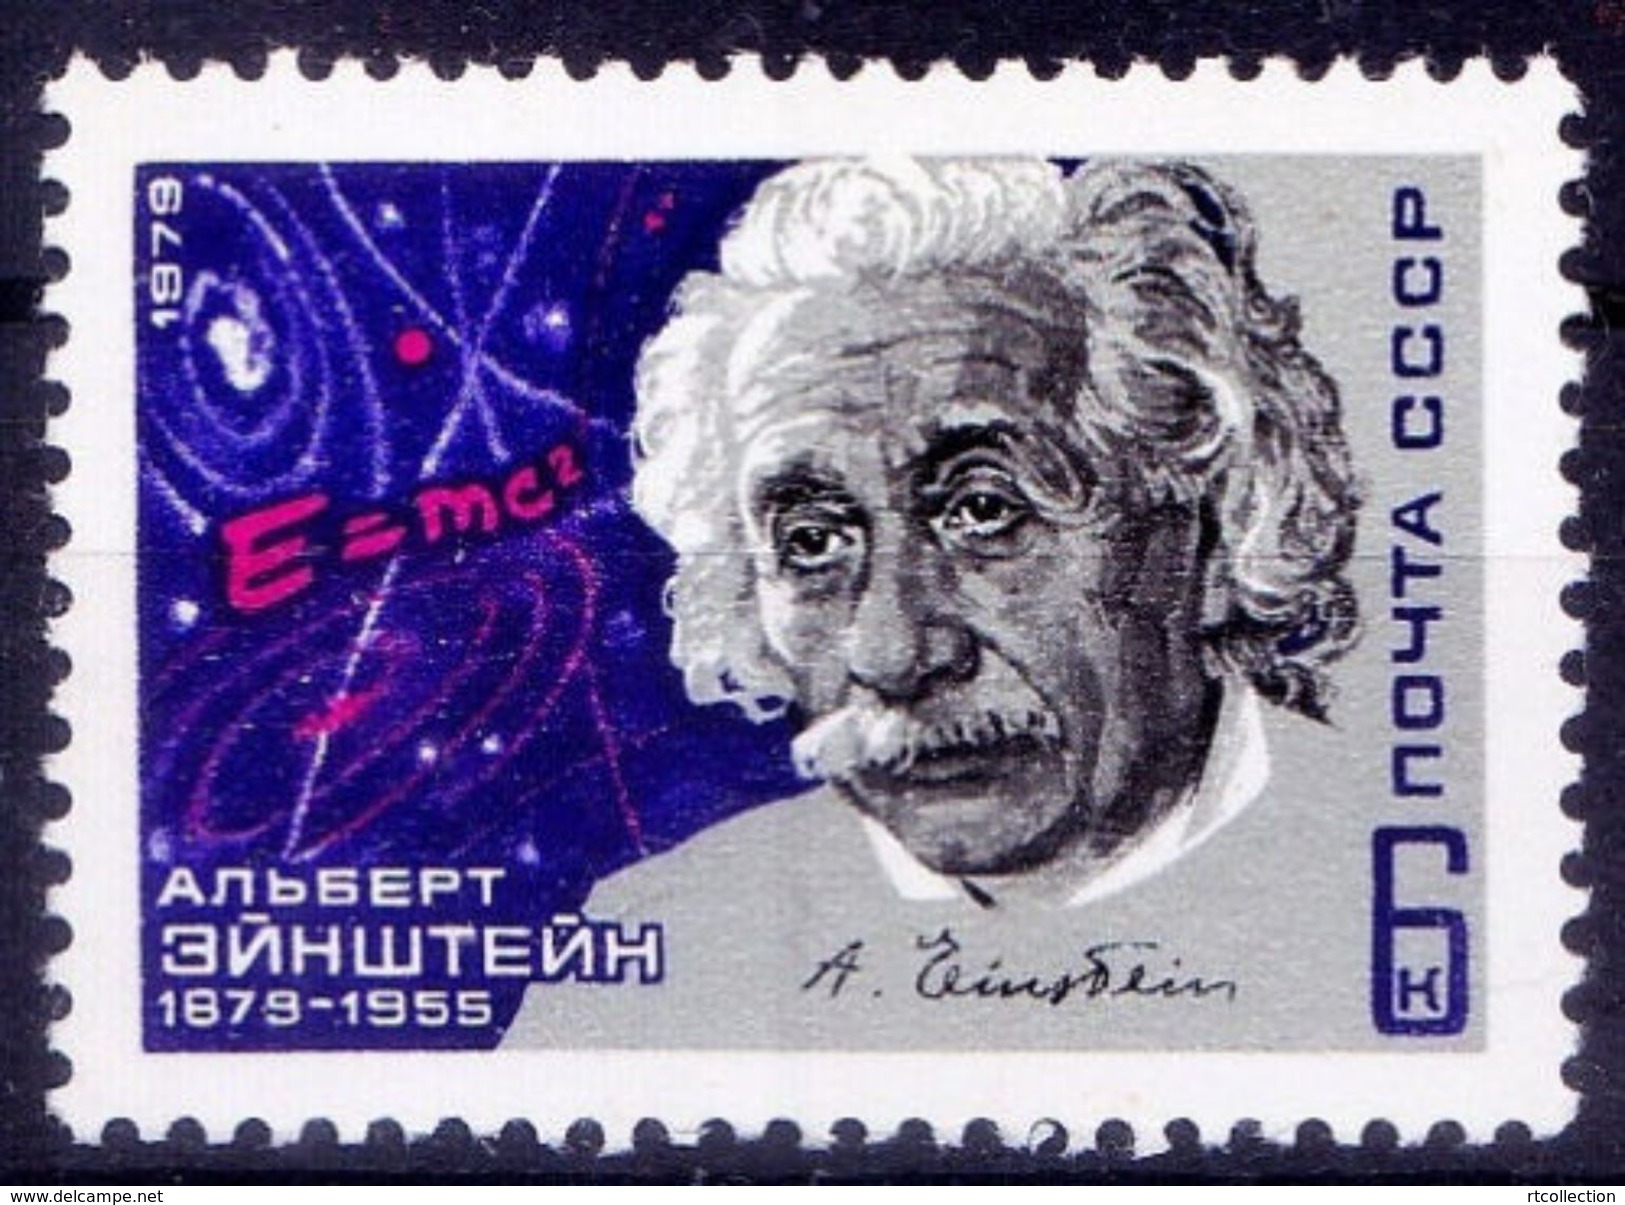 USSR Russia 1979 Famous People Albert Einstein Nobel Physics Physicist Sciences Soviet Stamp MNH Michel 4828 SG 4868 - Physics